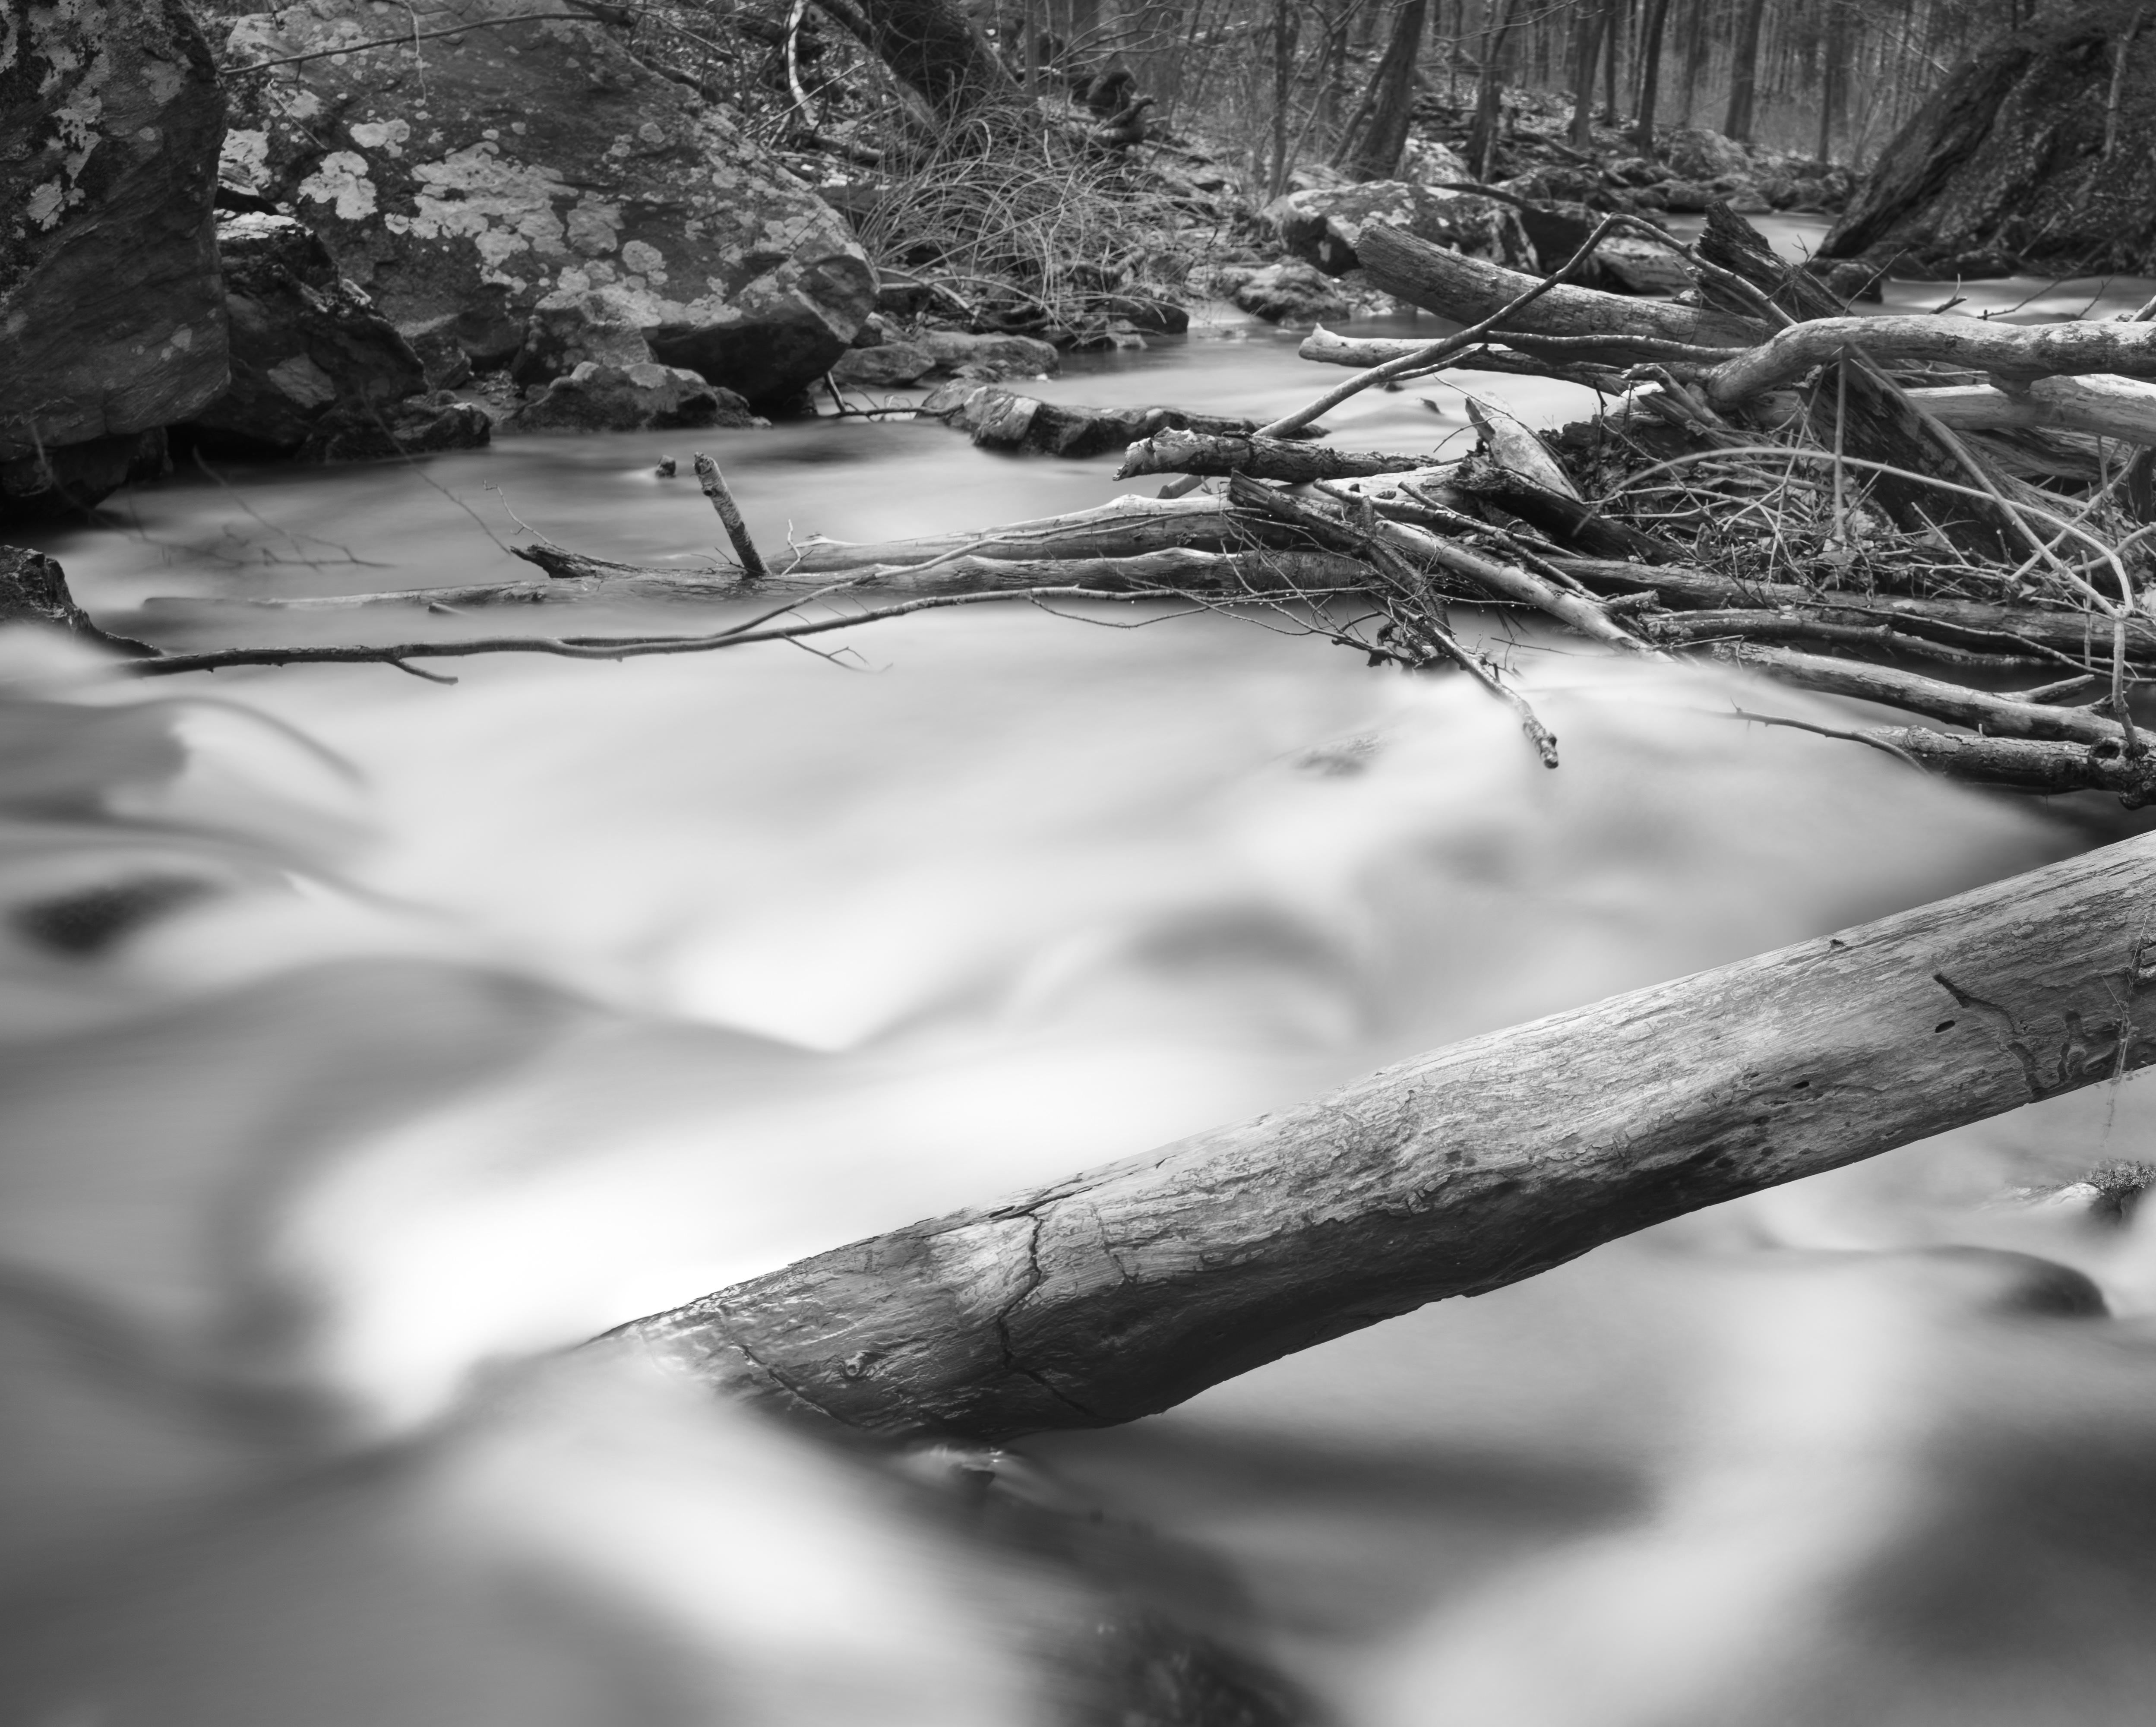  Limited Edition Black and White Photograph - "Fallen Tree" 17 x 22